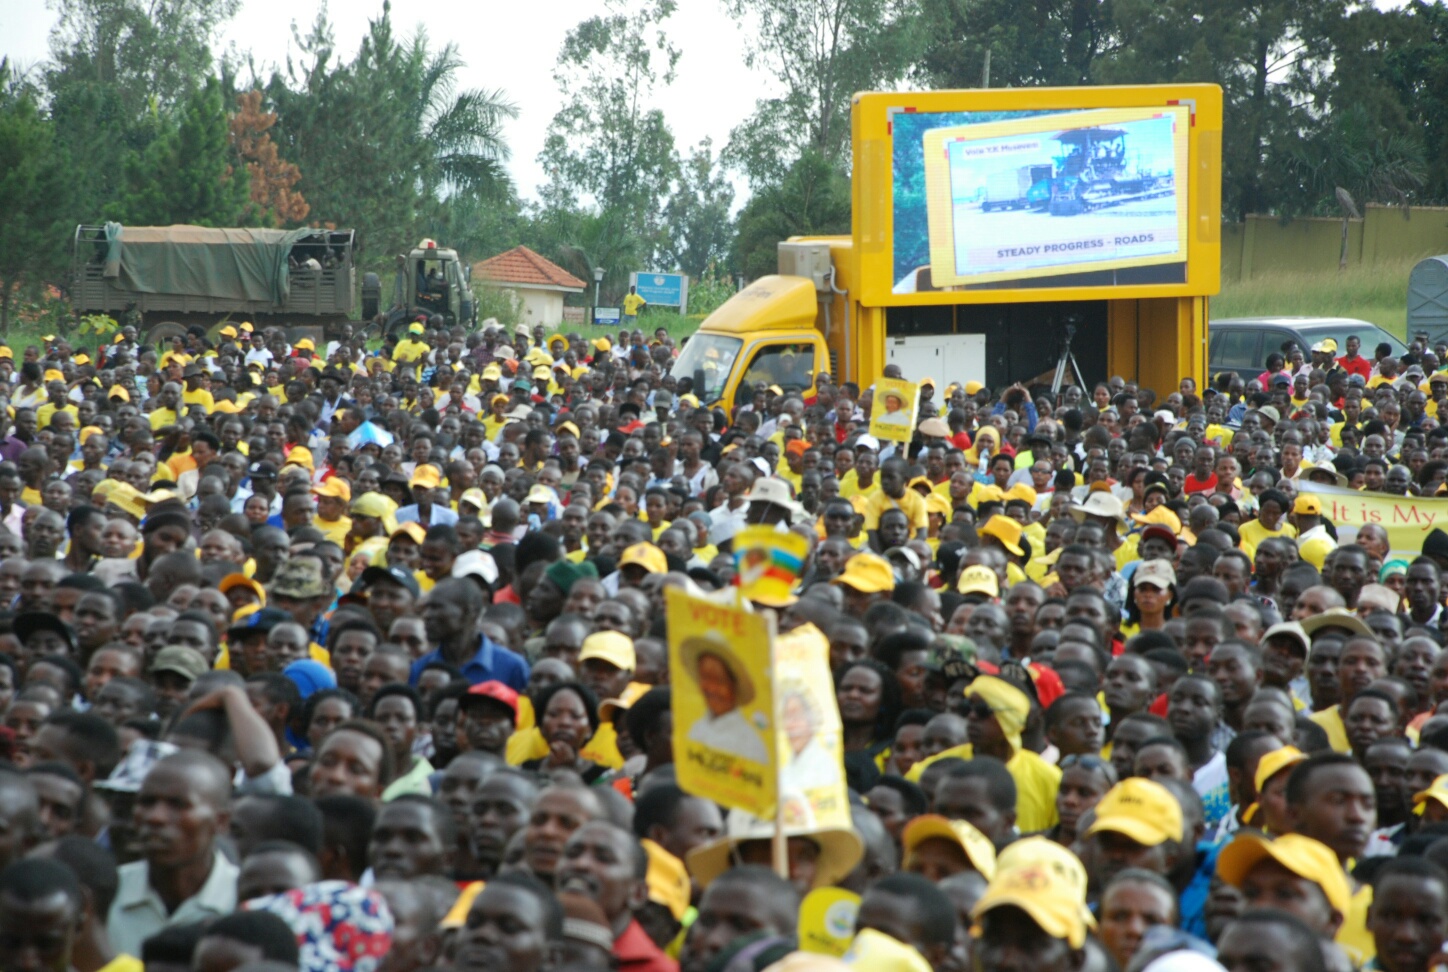 One of the trucks relaying the steady progress message of president Museveni,